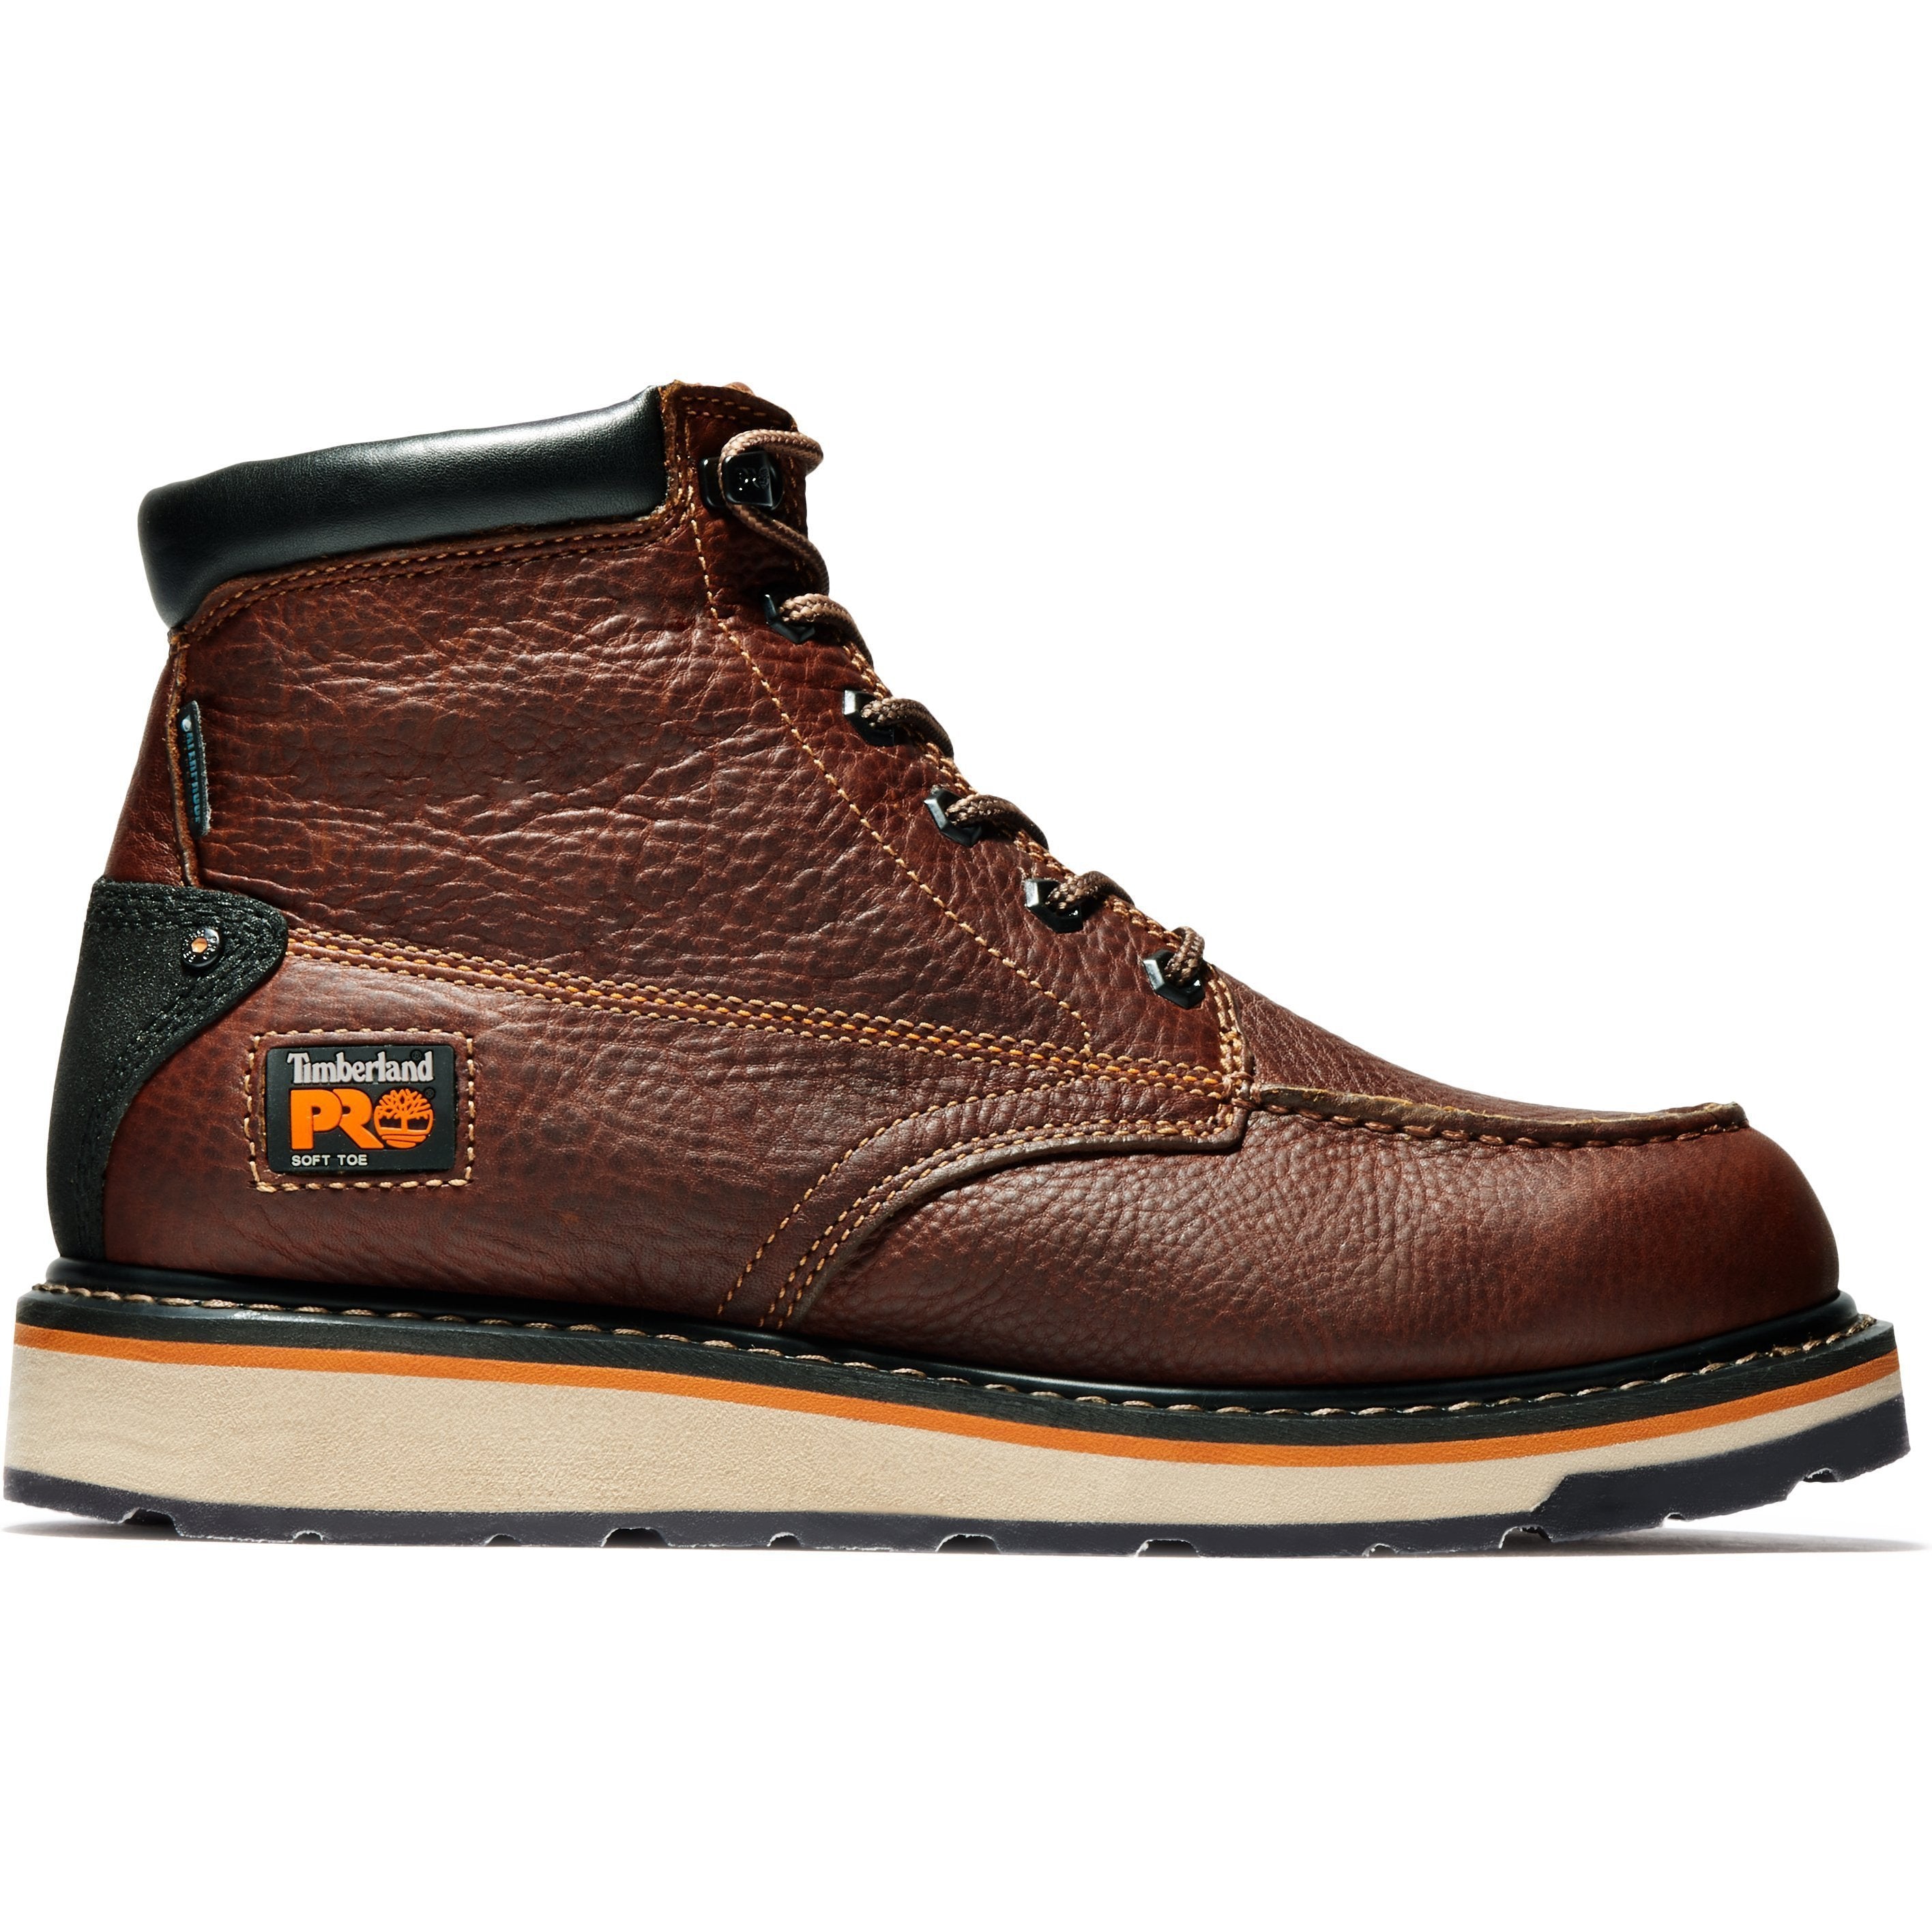 Timberland PRO Gridworks 6" WP Wedge Work Boot - Brown - TB0A1KRQ214  - Overlook Boots